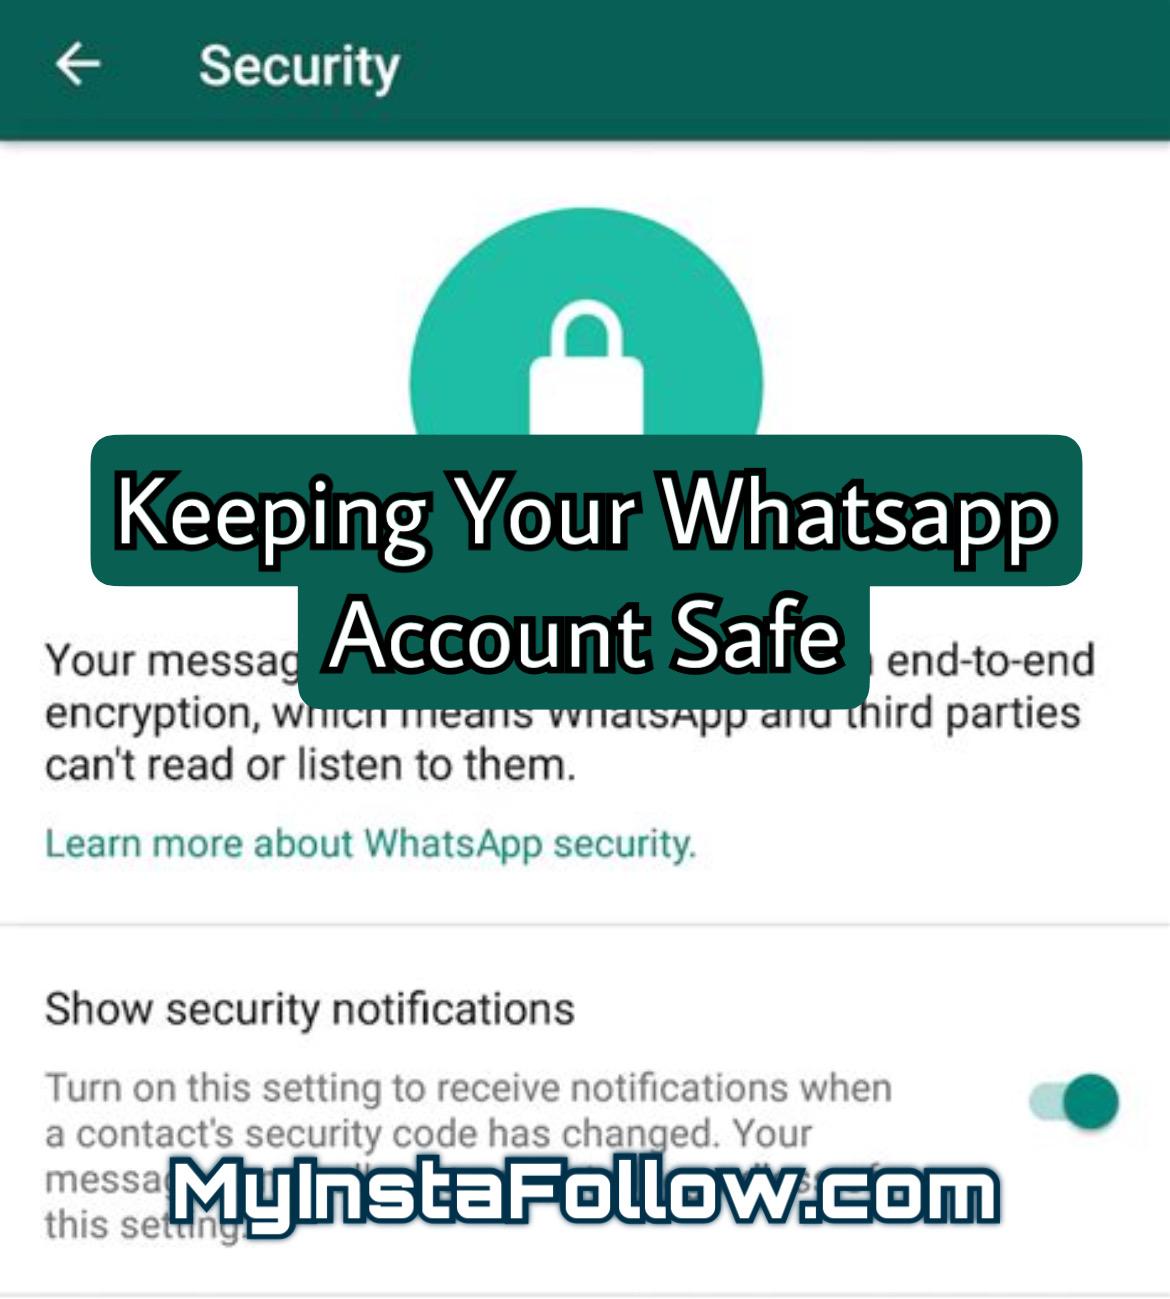 Enable WhatsApp's "Show Security Notifications" feature
Be cautious when downloading apps from unknown sources